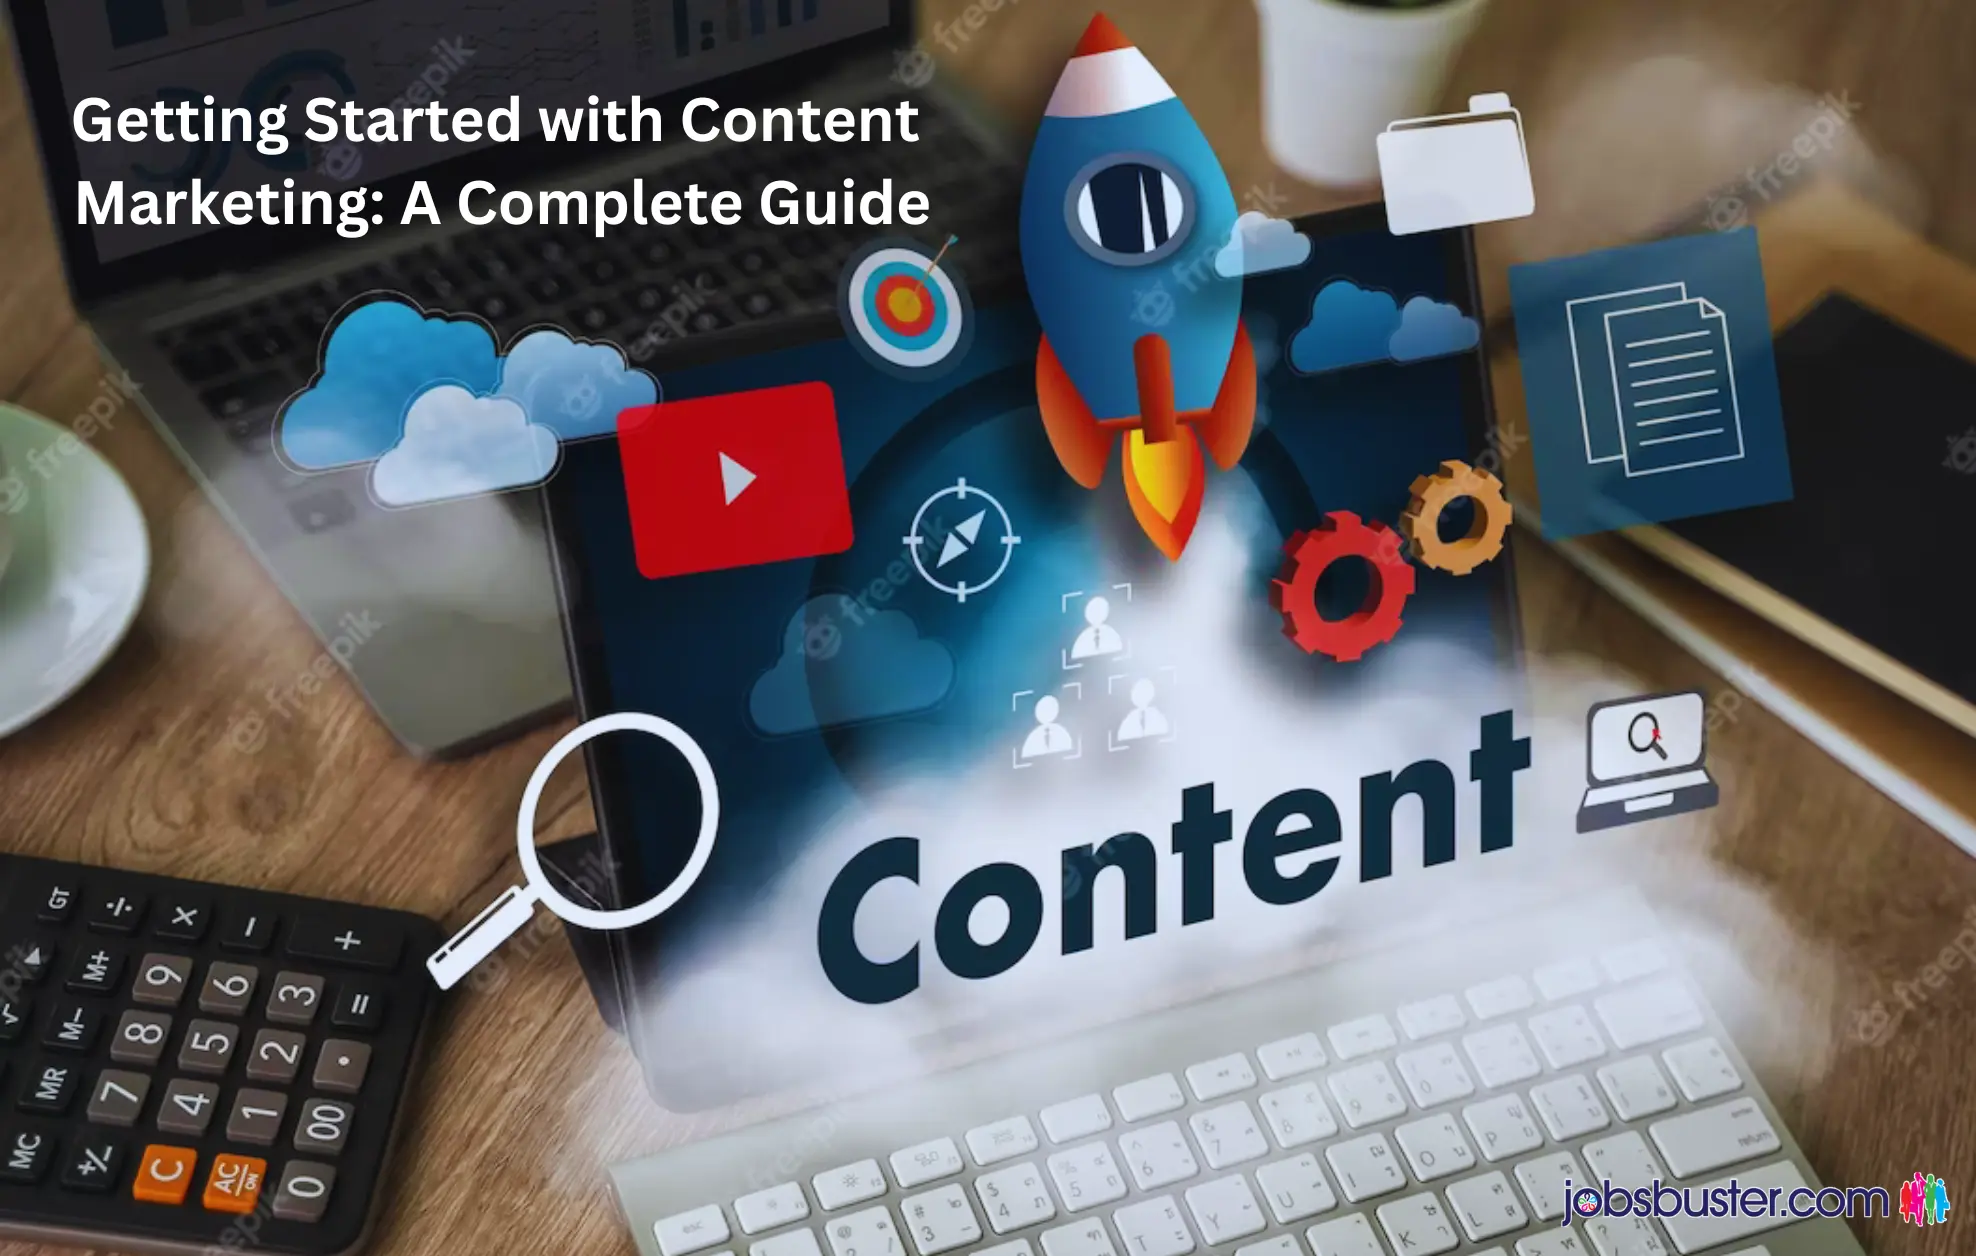 Getting Started with Content Marketing: A Complete Guide